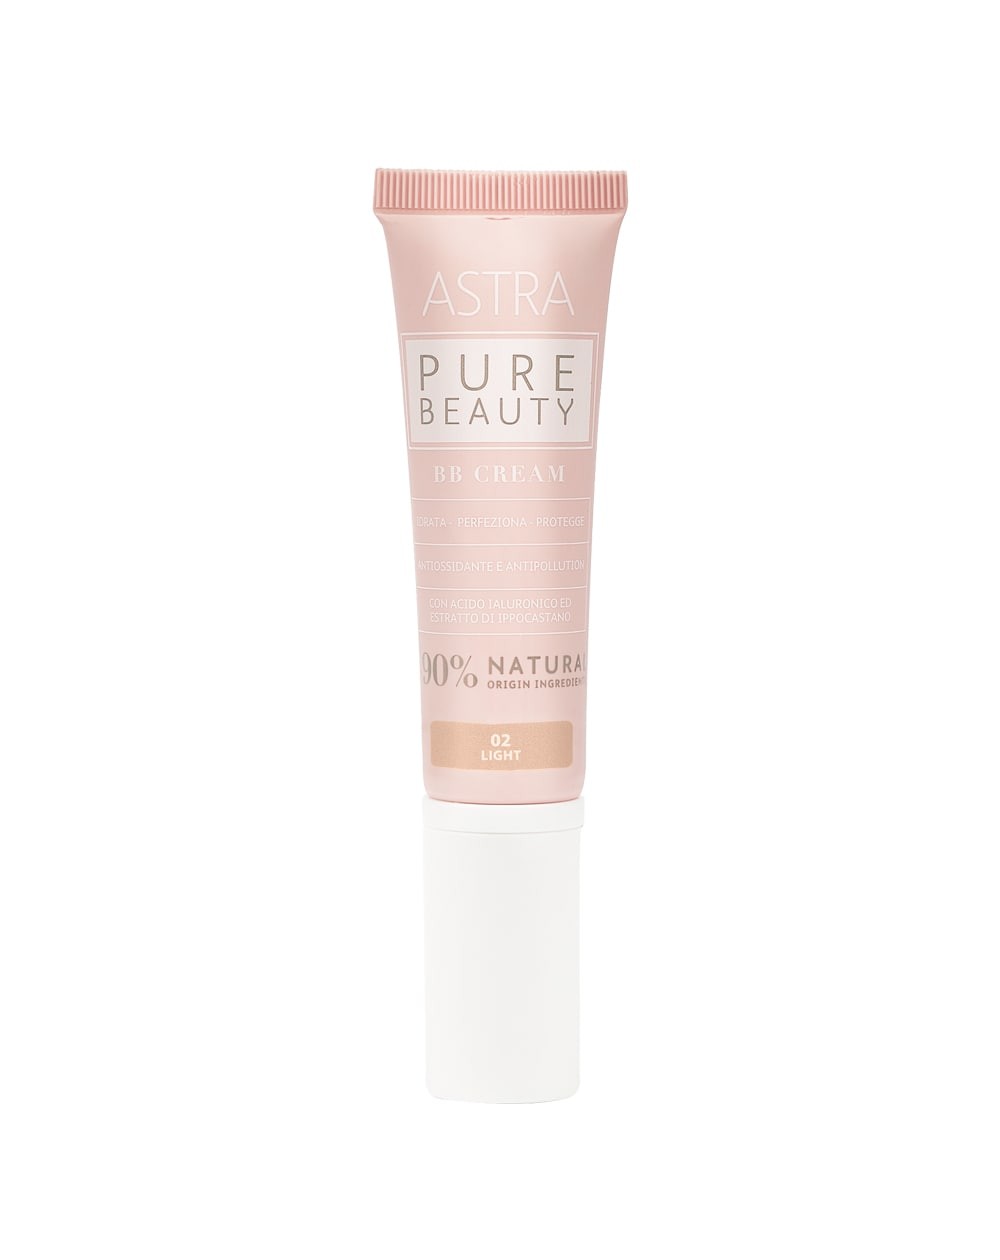 BB CREAM Astra Pure Beauty n. 02 Light | RossoLacca